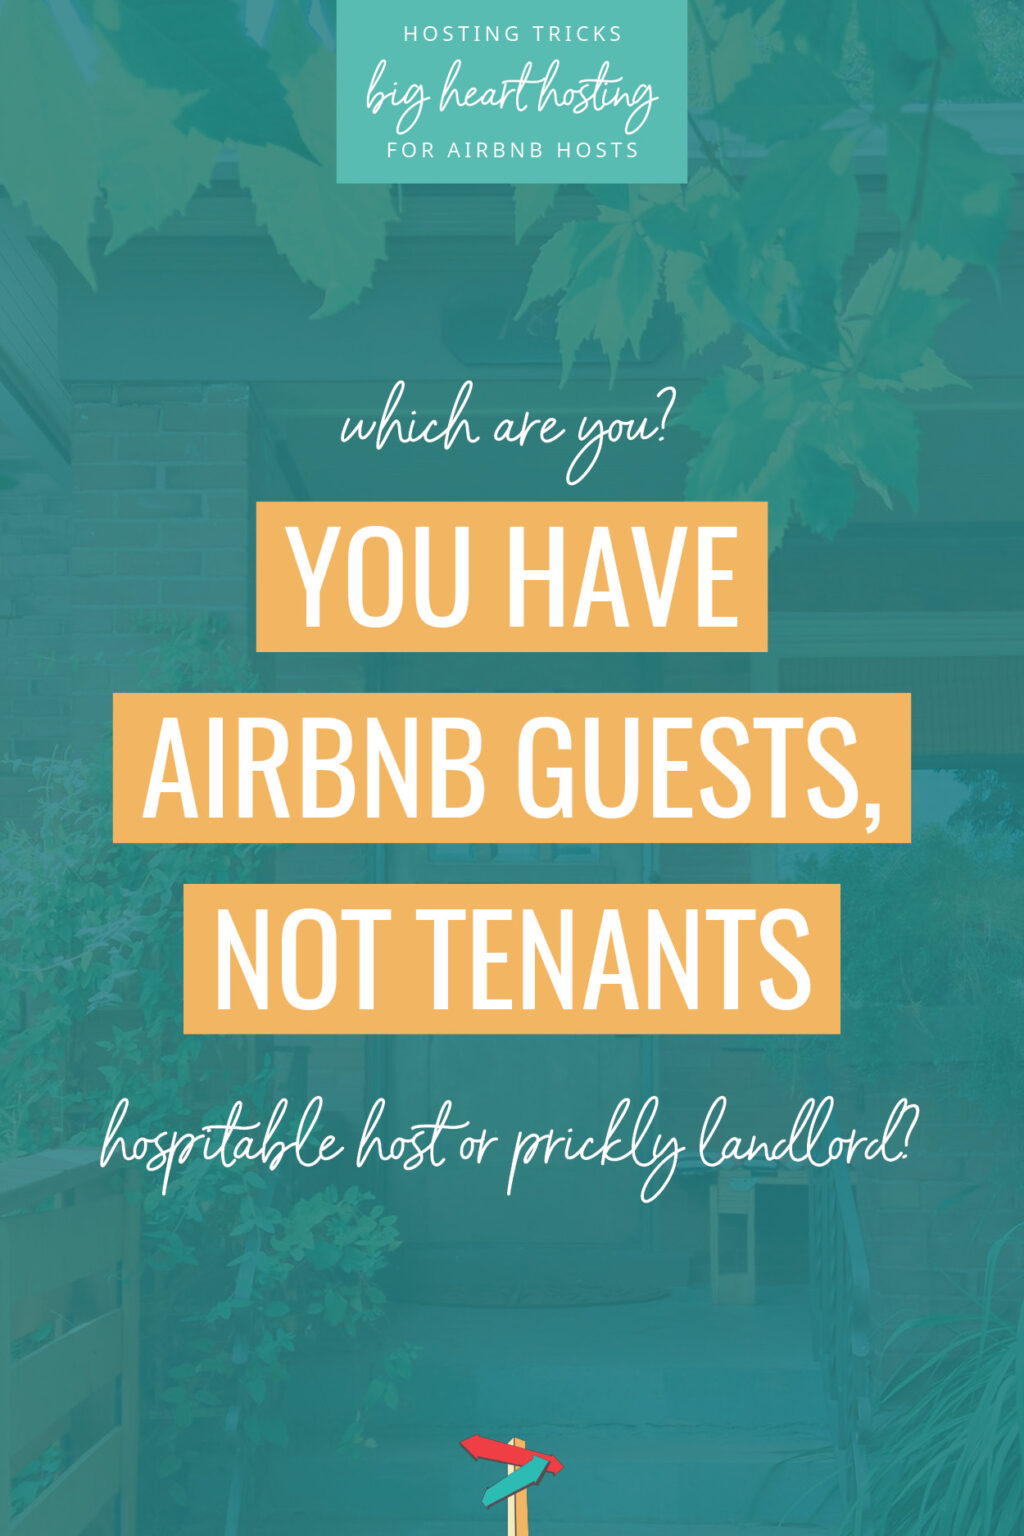 how to be a hospitable airbnb host